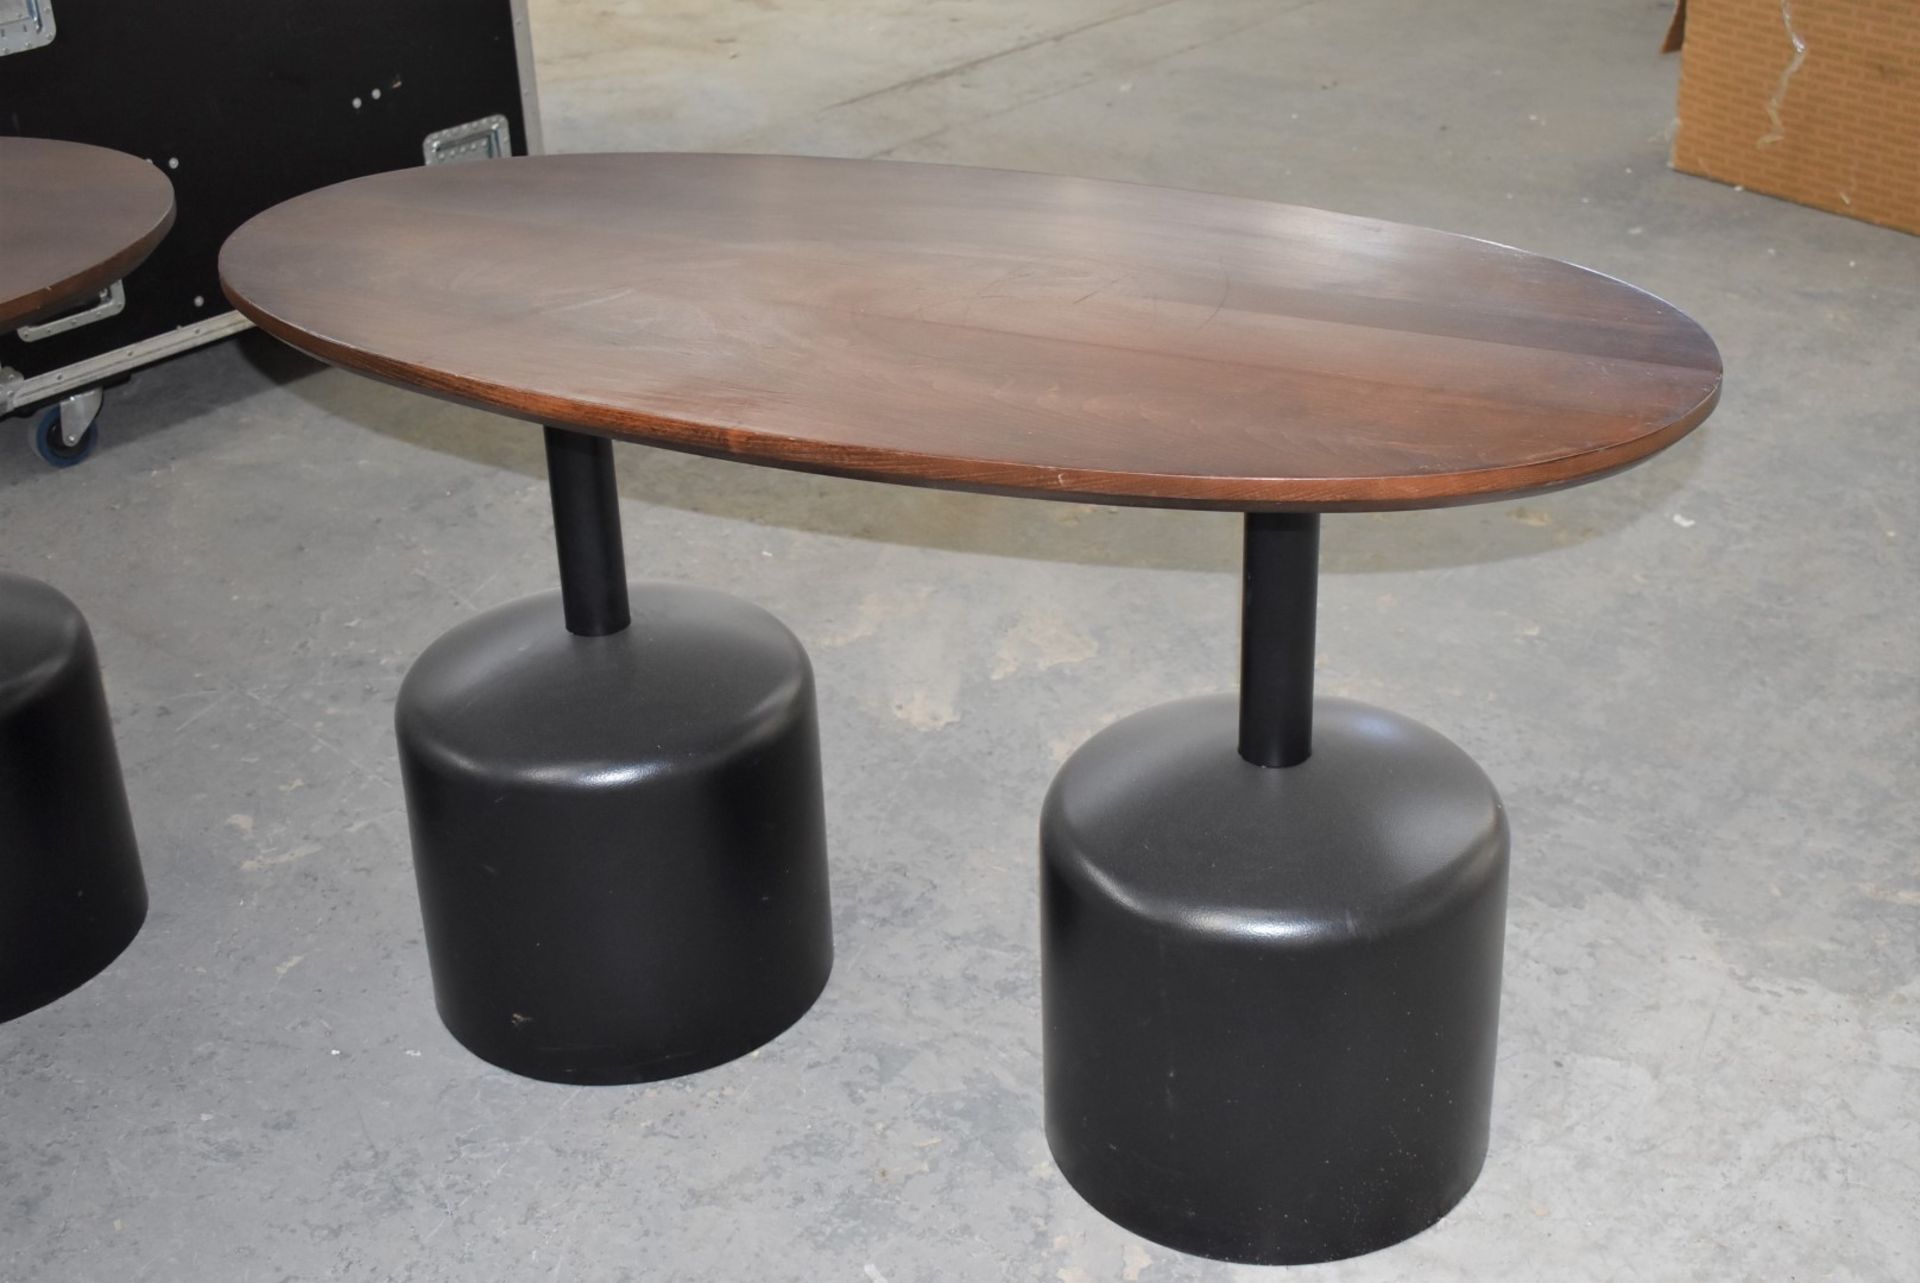 14 x Commercial Restaurant Tables Features Large Black Pedestals and Dark Stained Wooden Tops - Image 3 of 23